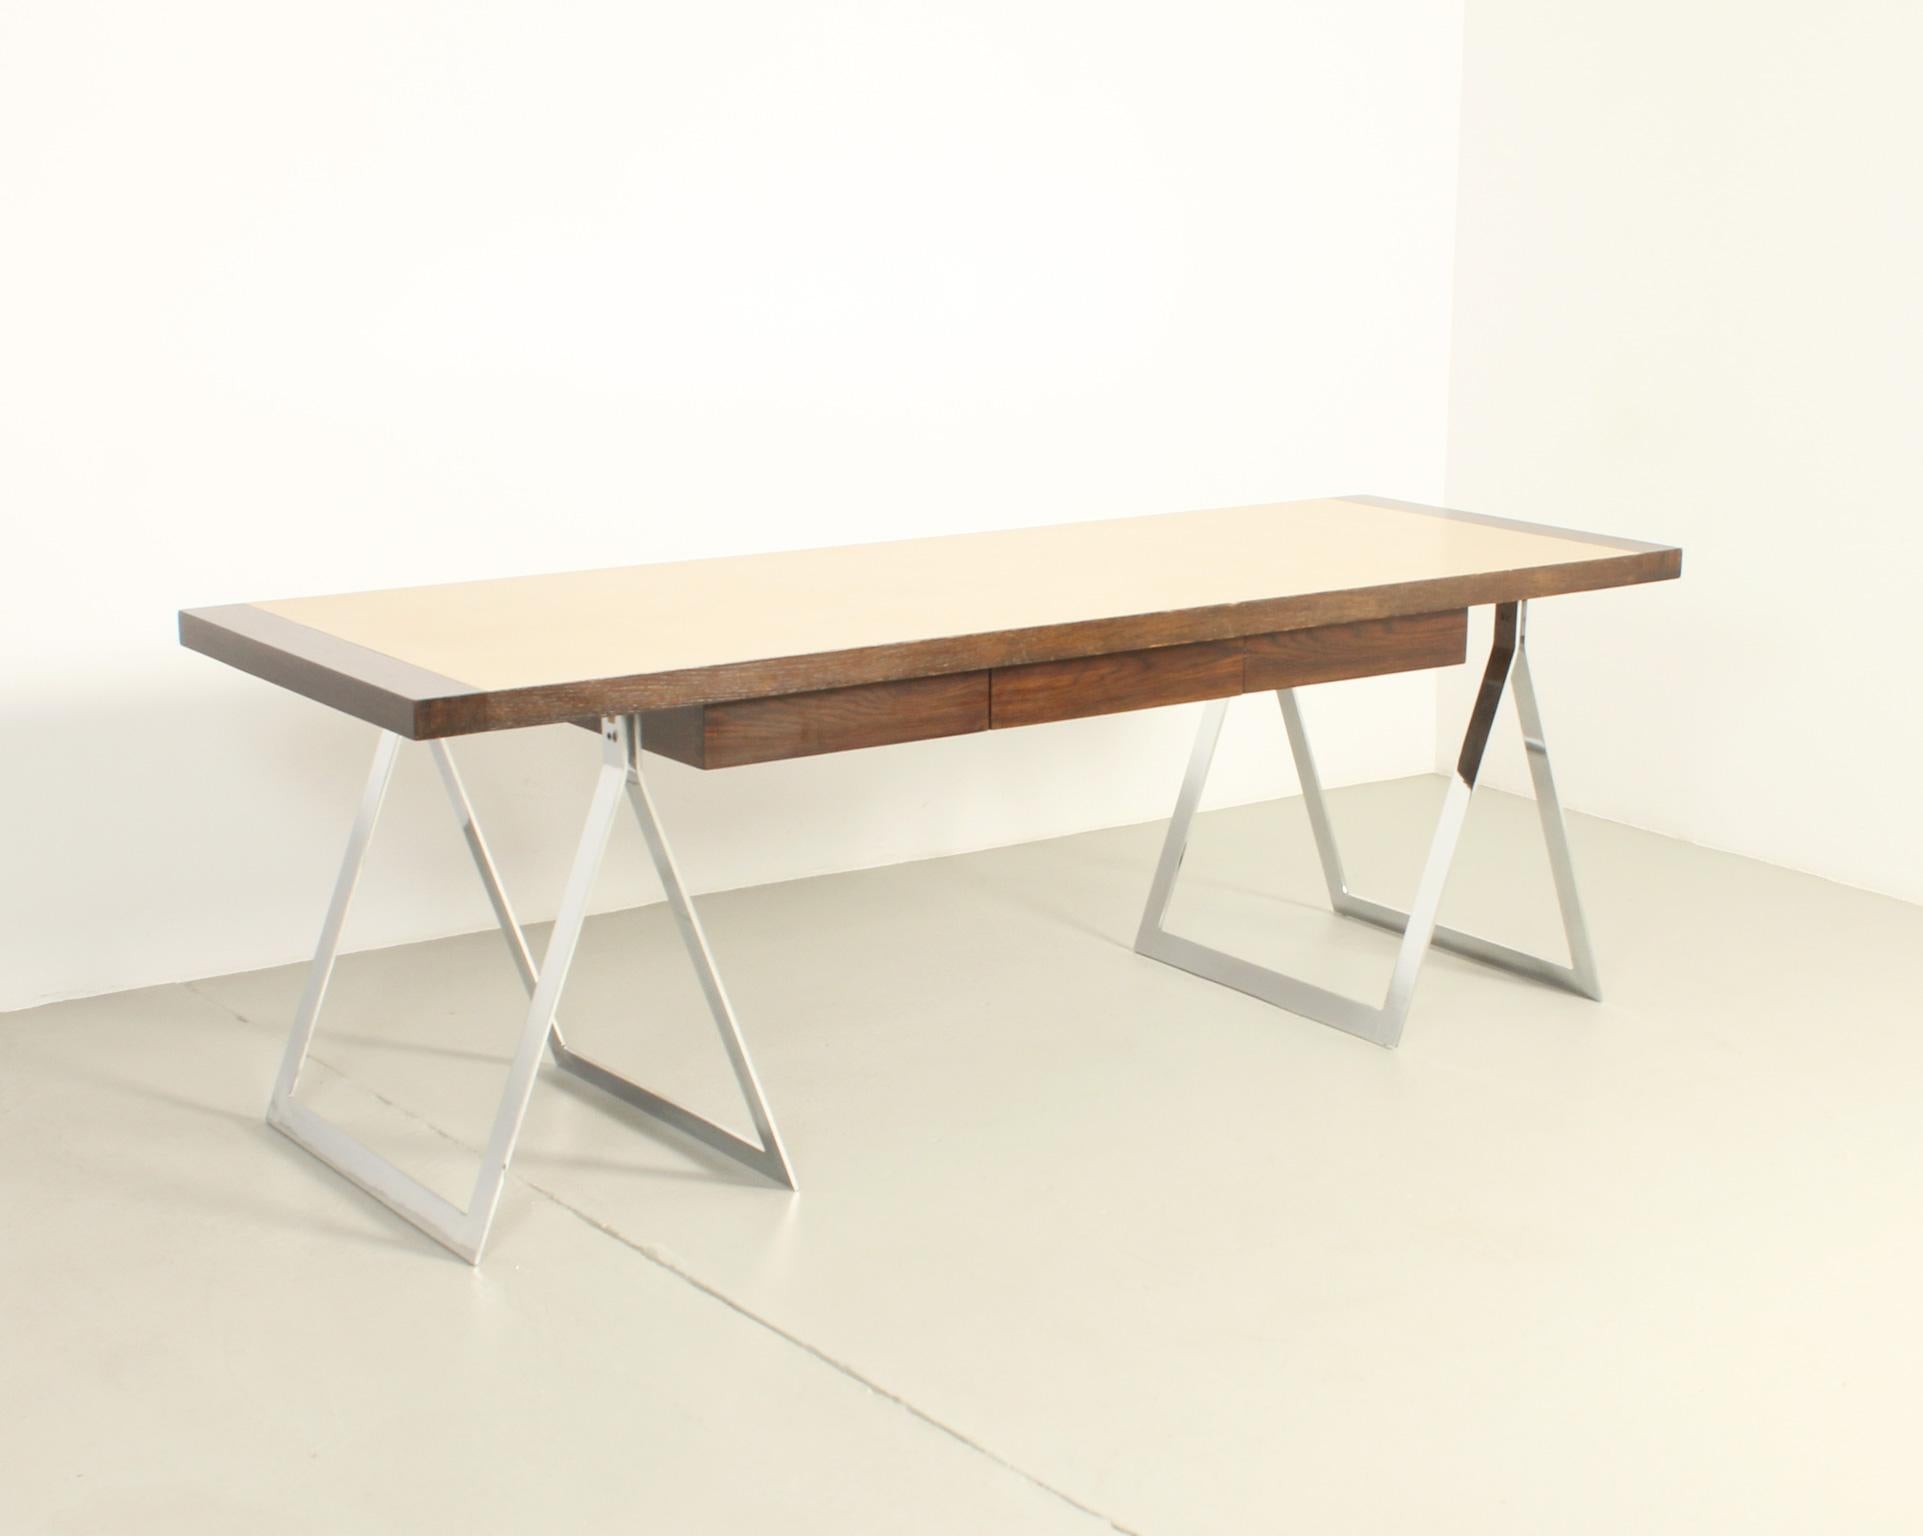 Cavalletto desk designed in 1970 by Japanese architect Kazuhide Takahama for MYC-Gavina. Rare model with three drawers in stained oak wood and champagne laminate, trestles bases in chrome platted steel. It's the Spanish edition from MYC, signed on